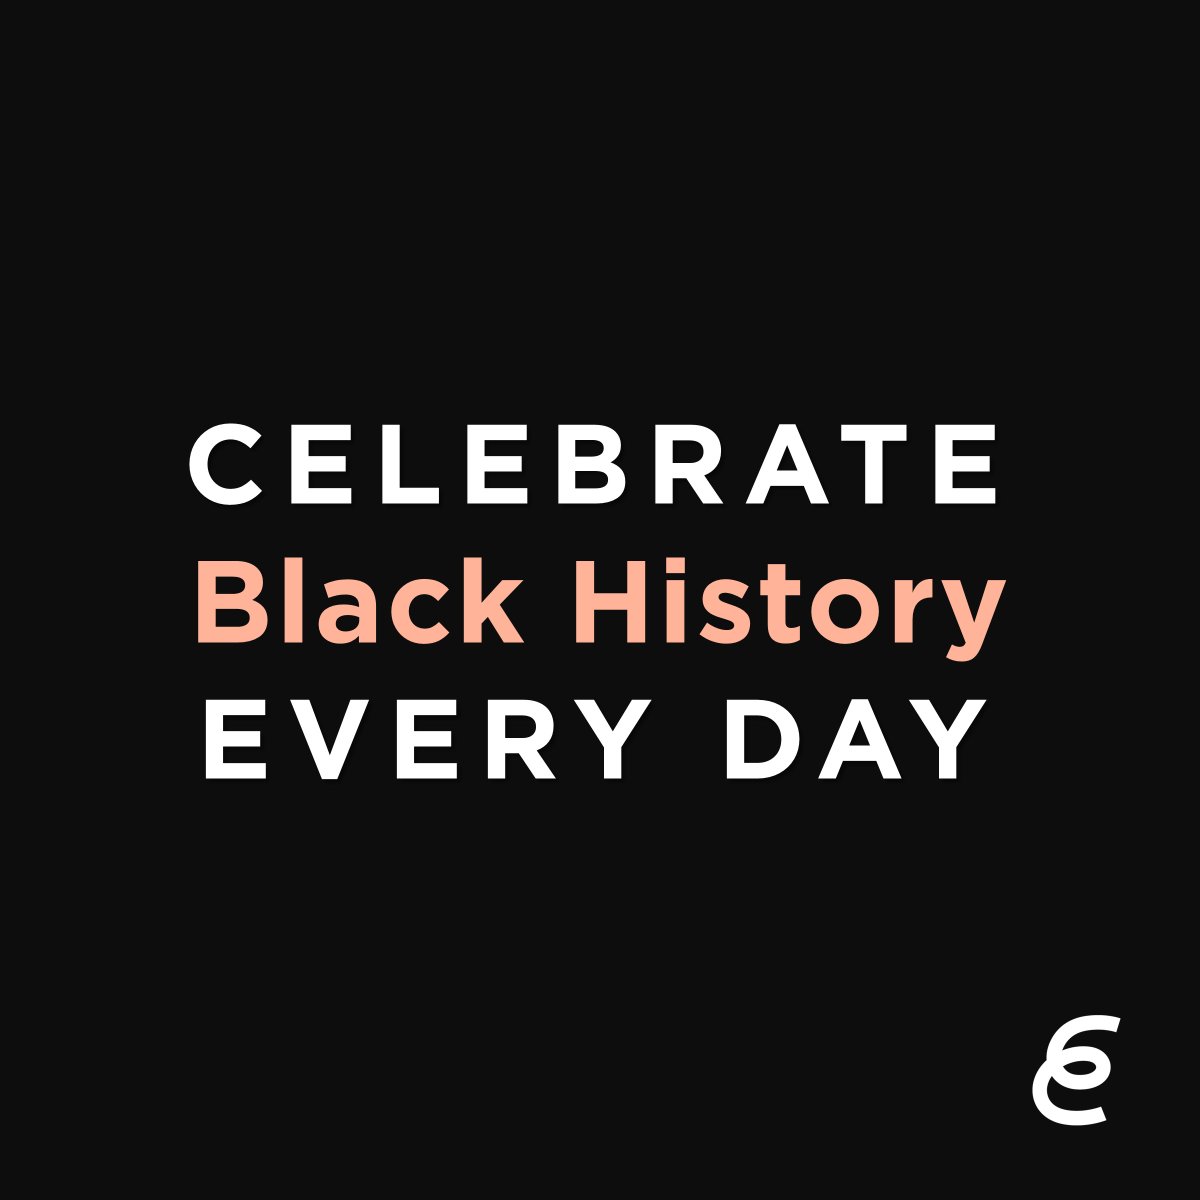 February reminds us to honor the impact and contributions of Black Americans throughout history, and those making their mark today. #BlackHistory #BHM #DEIB #diversity #equity #inclusion #belonging